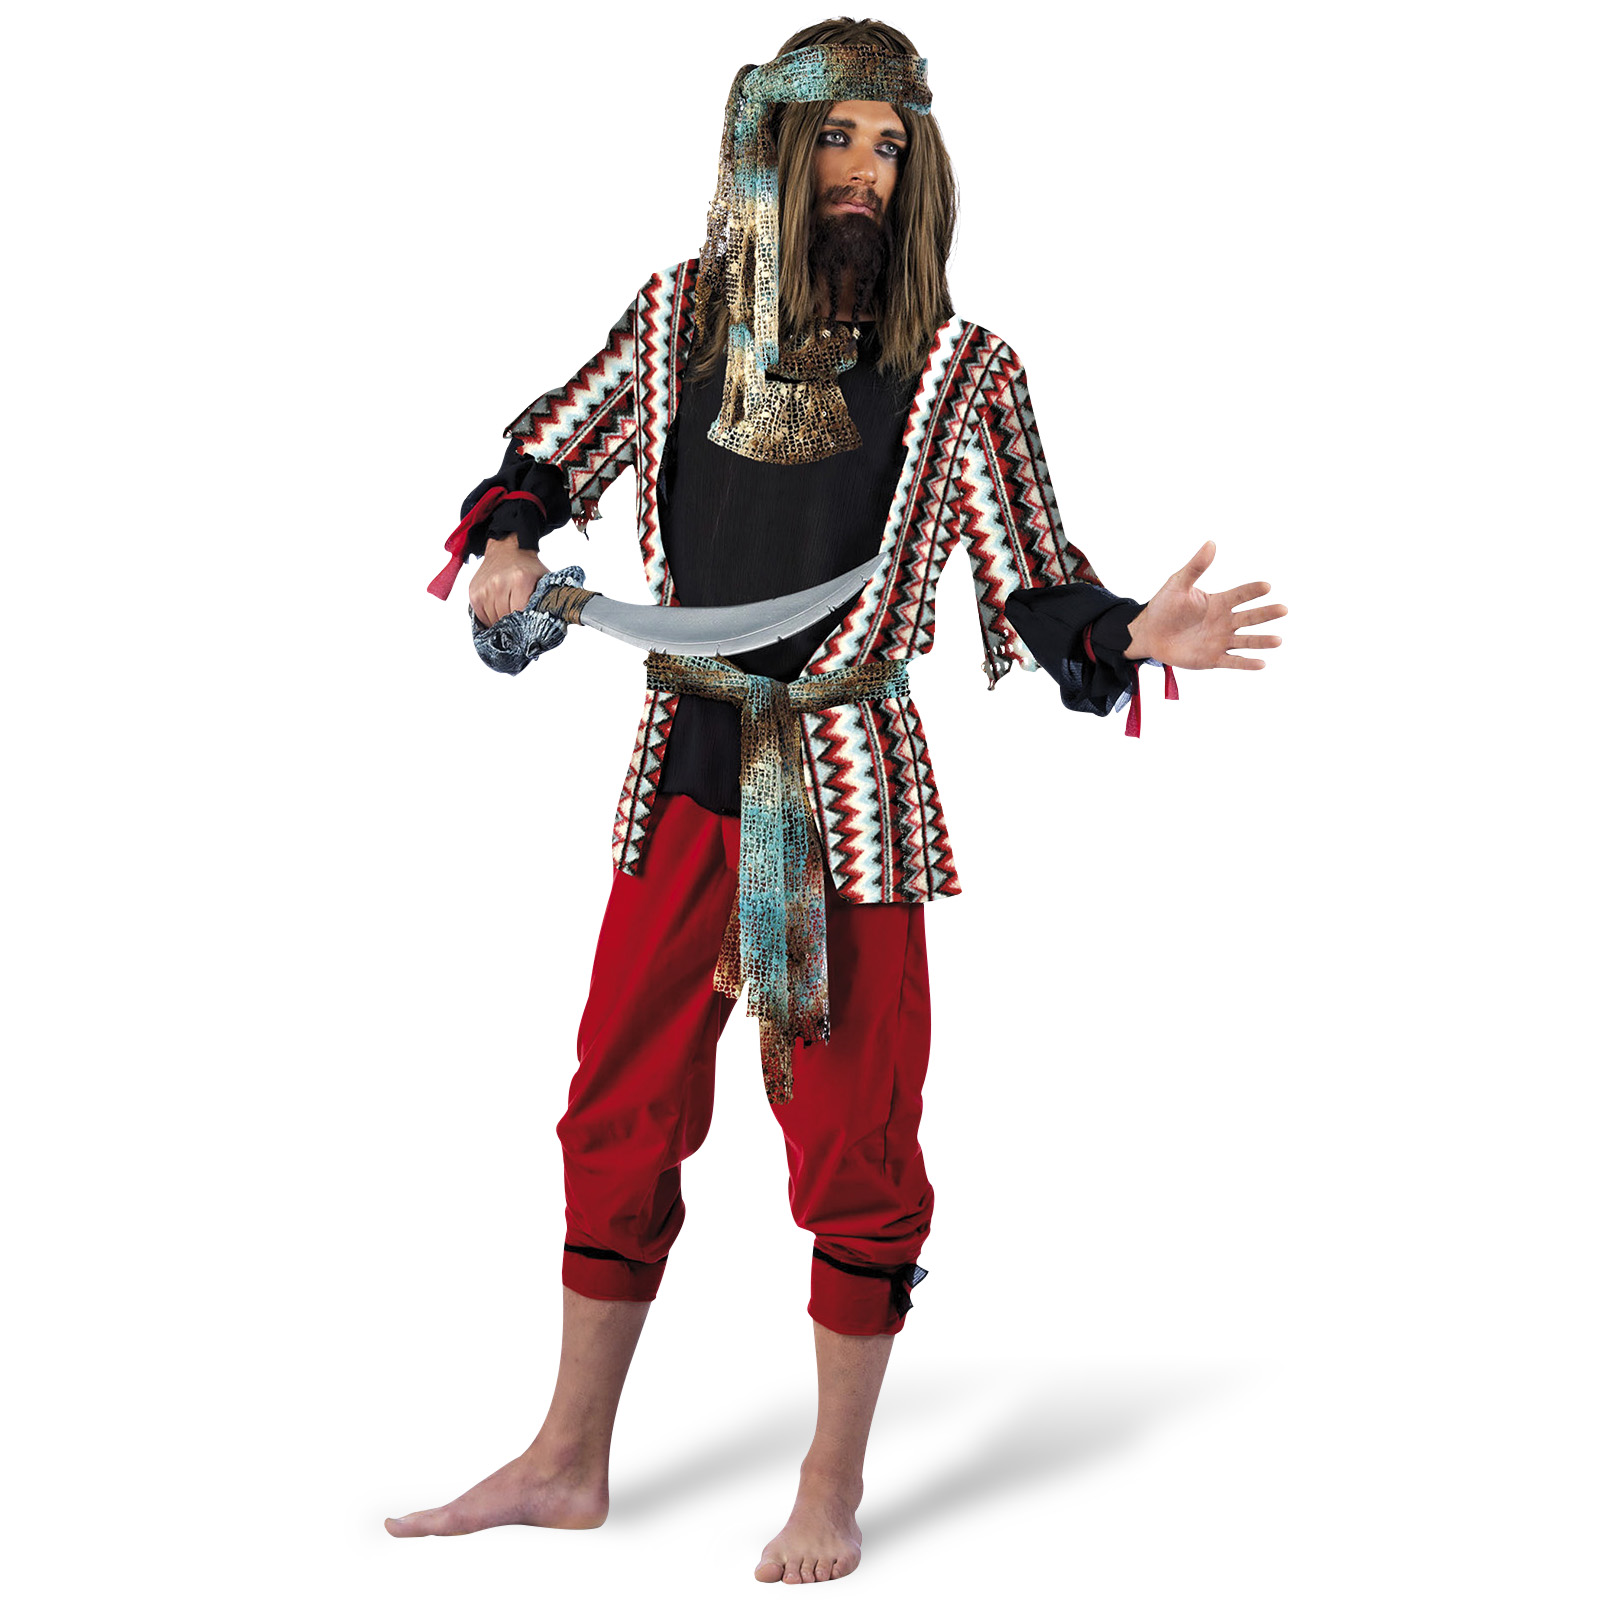 Costume d'homme pirate flamboyant